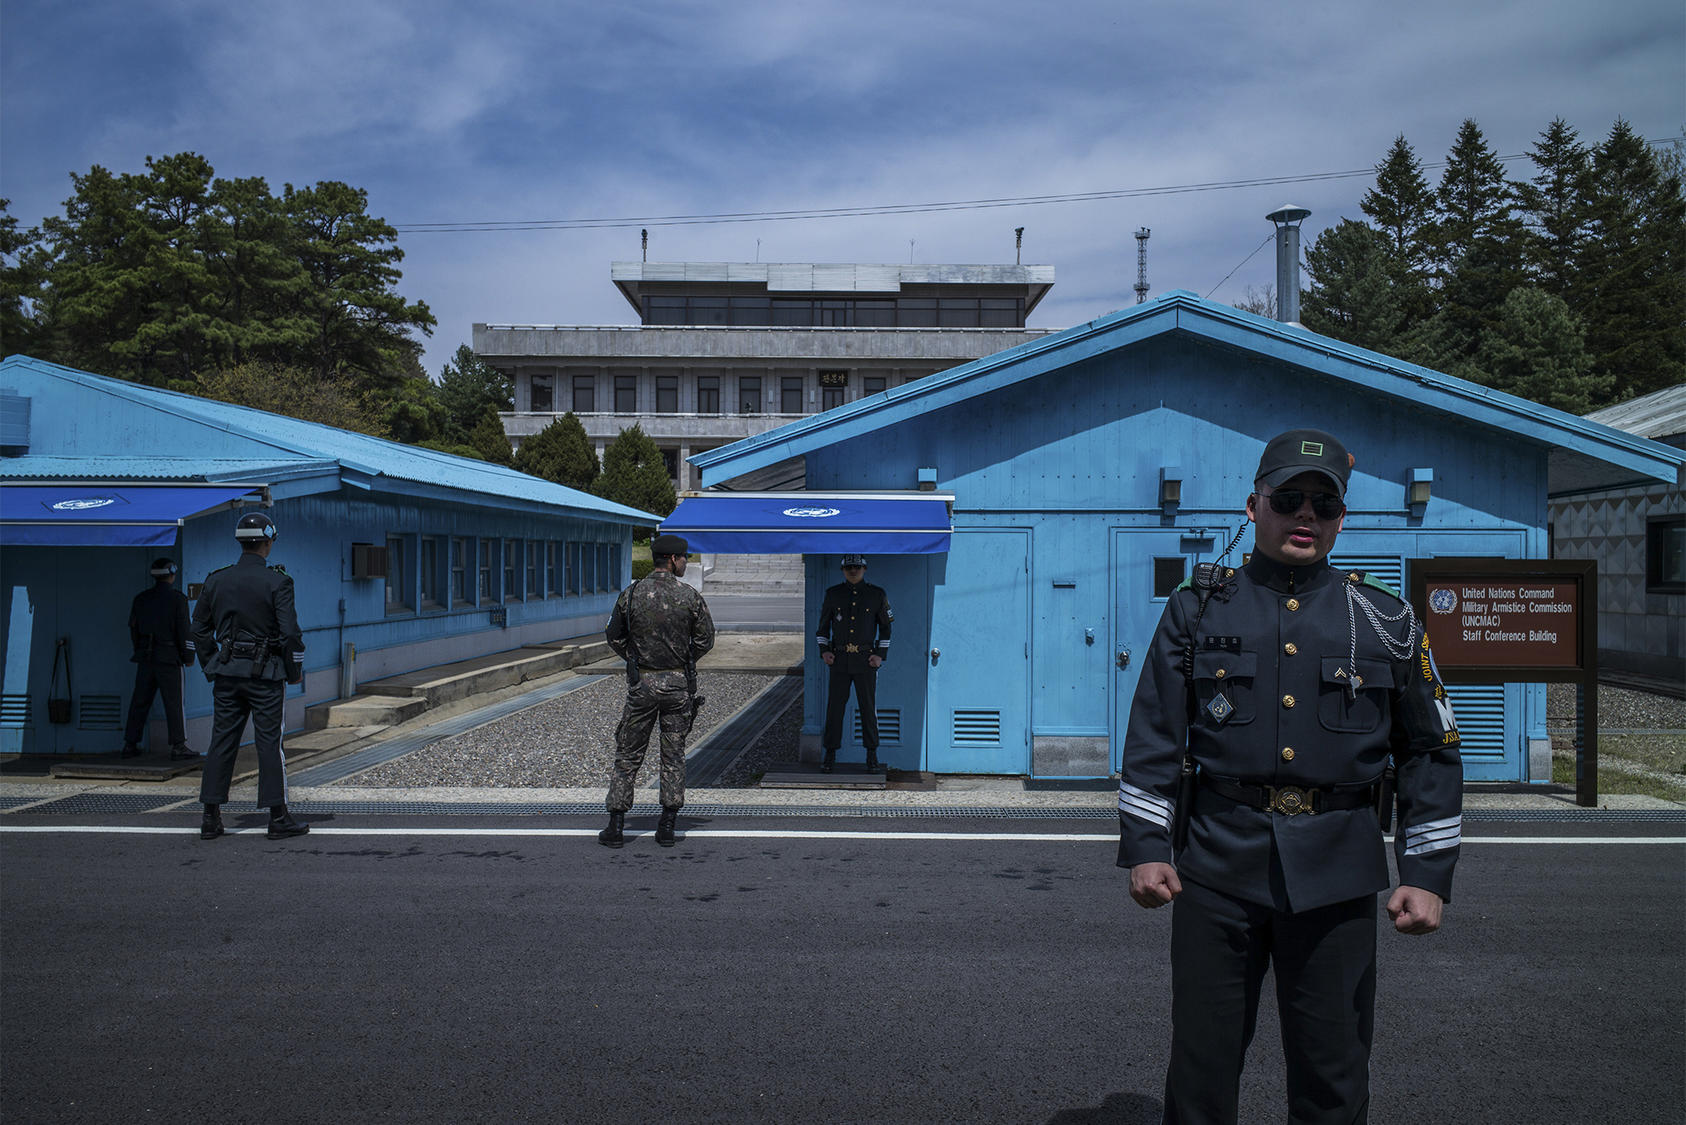 Soldiers stand guard outside of meeting rooms that straddle the border between North and South Korea in Panmunjom along the Demilitarized Zone, April 19, 2017. (Lam Yik Fei/The New York Times) 